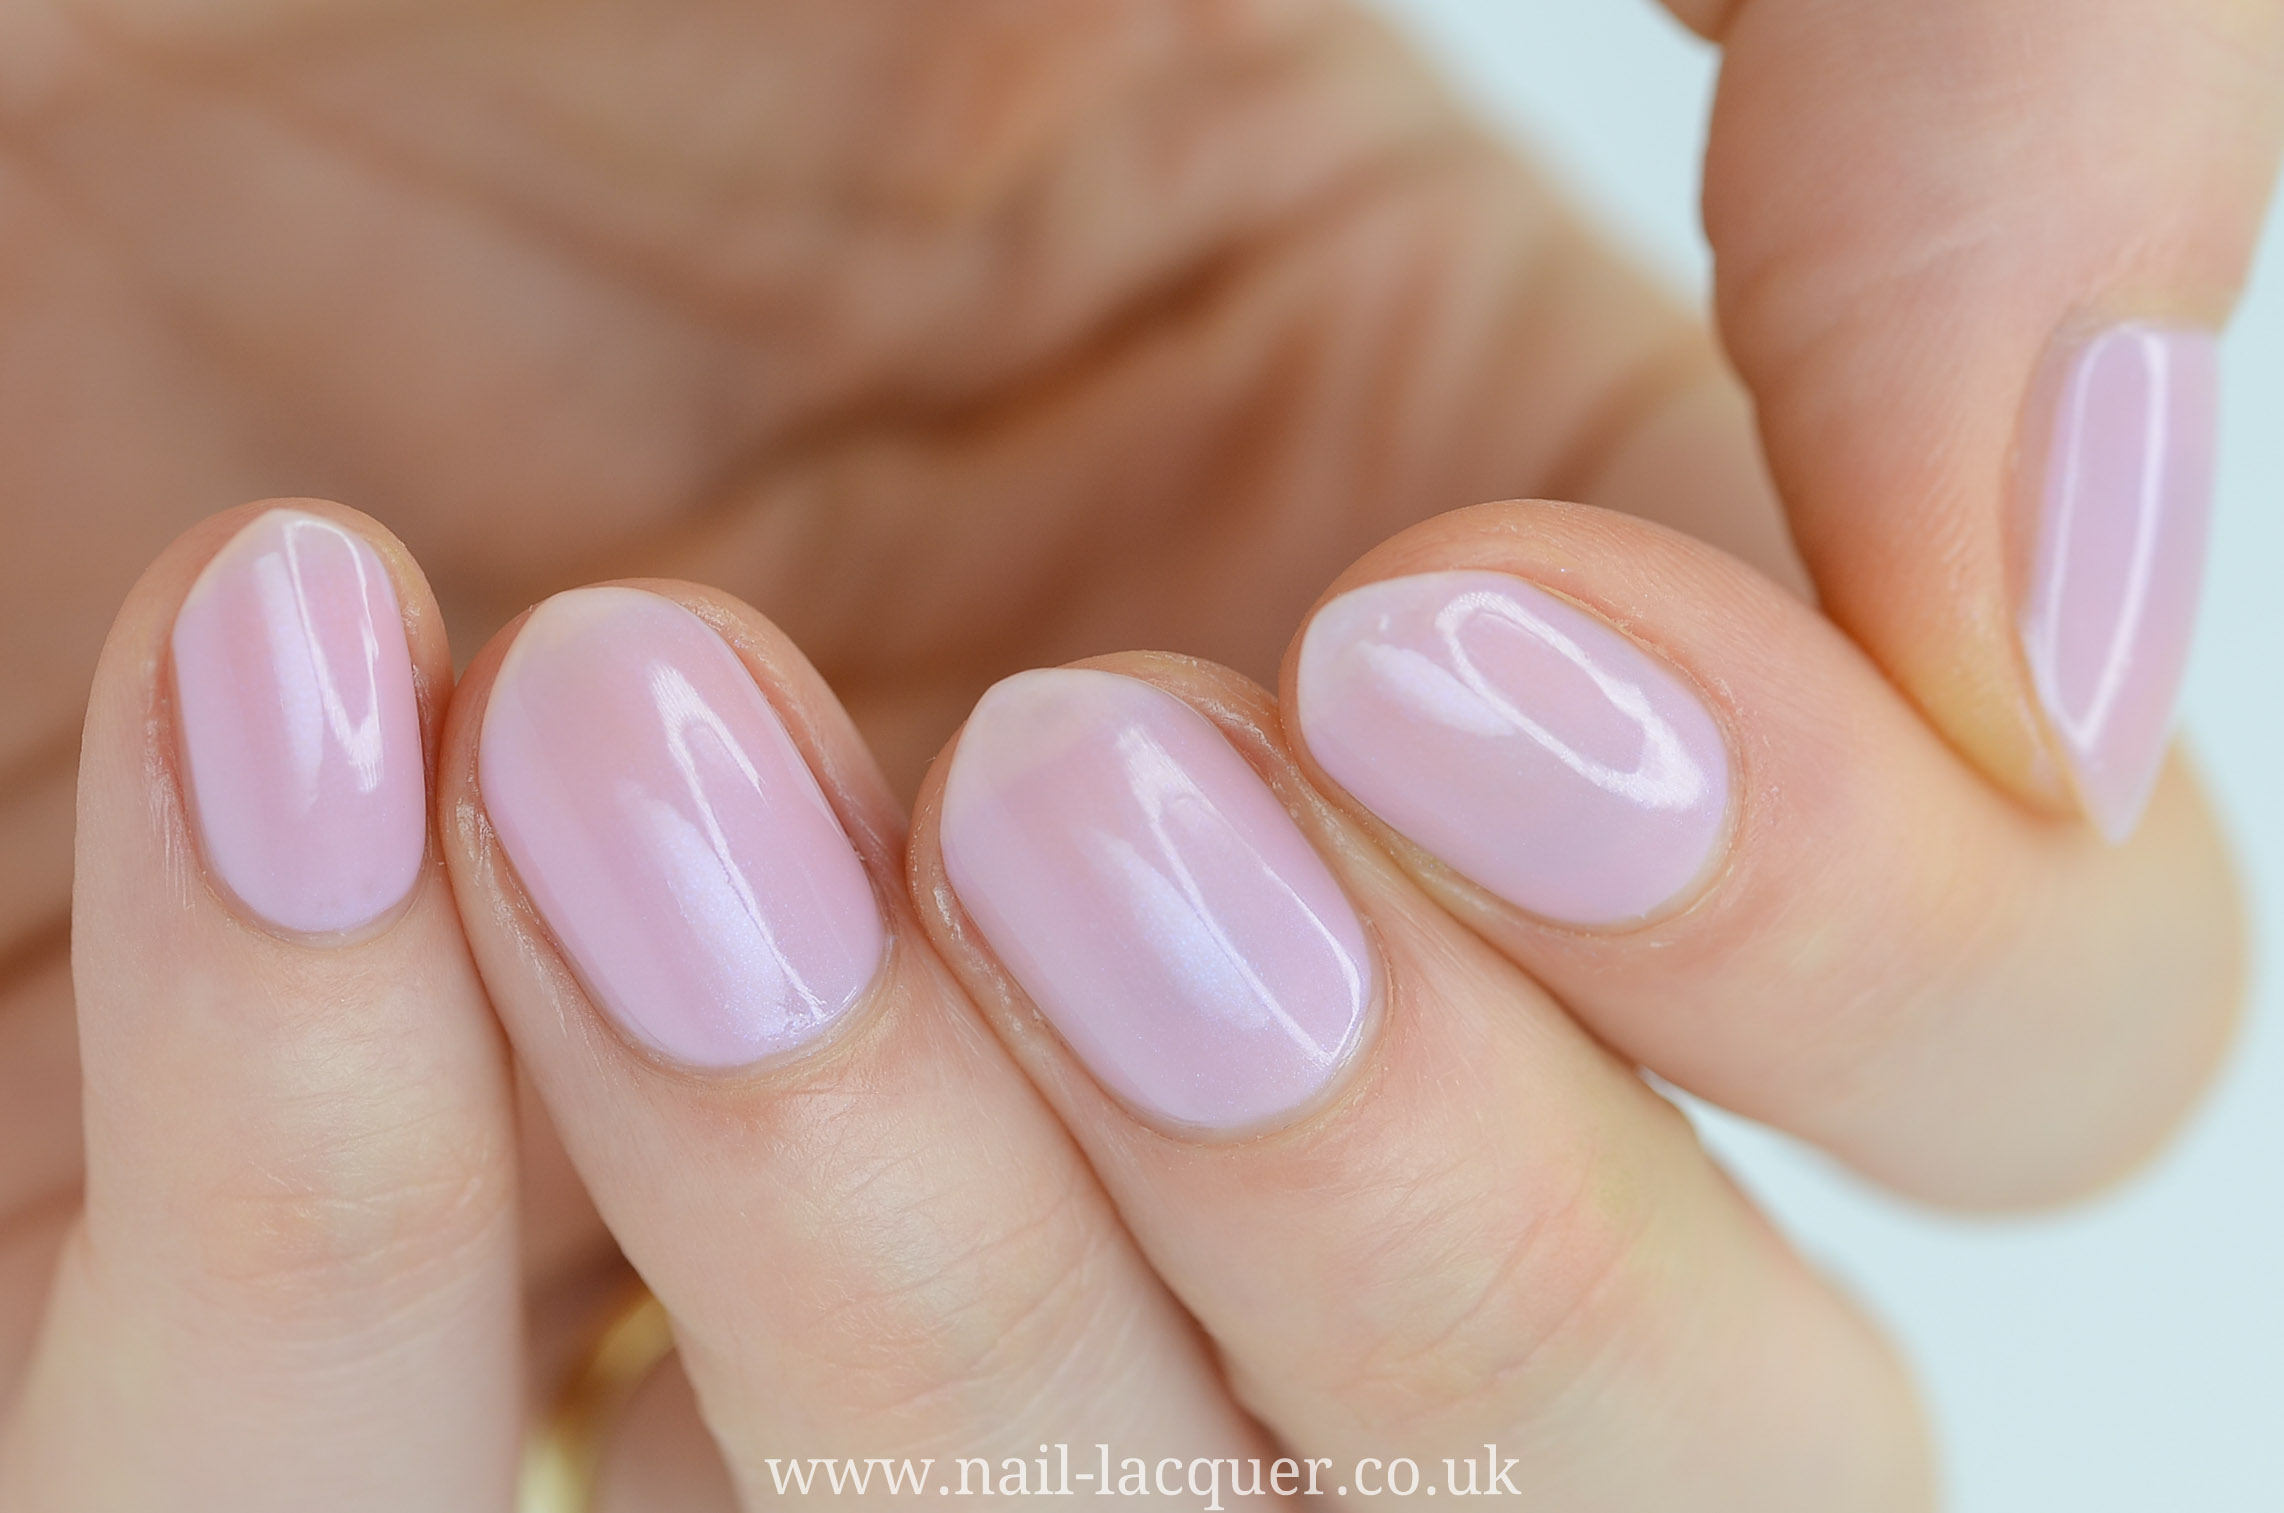 1. CND Shellac Nail Art Tutorials: How to Create Beautiful Nails at Home - wide 9